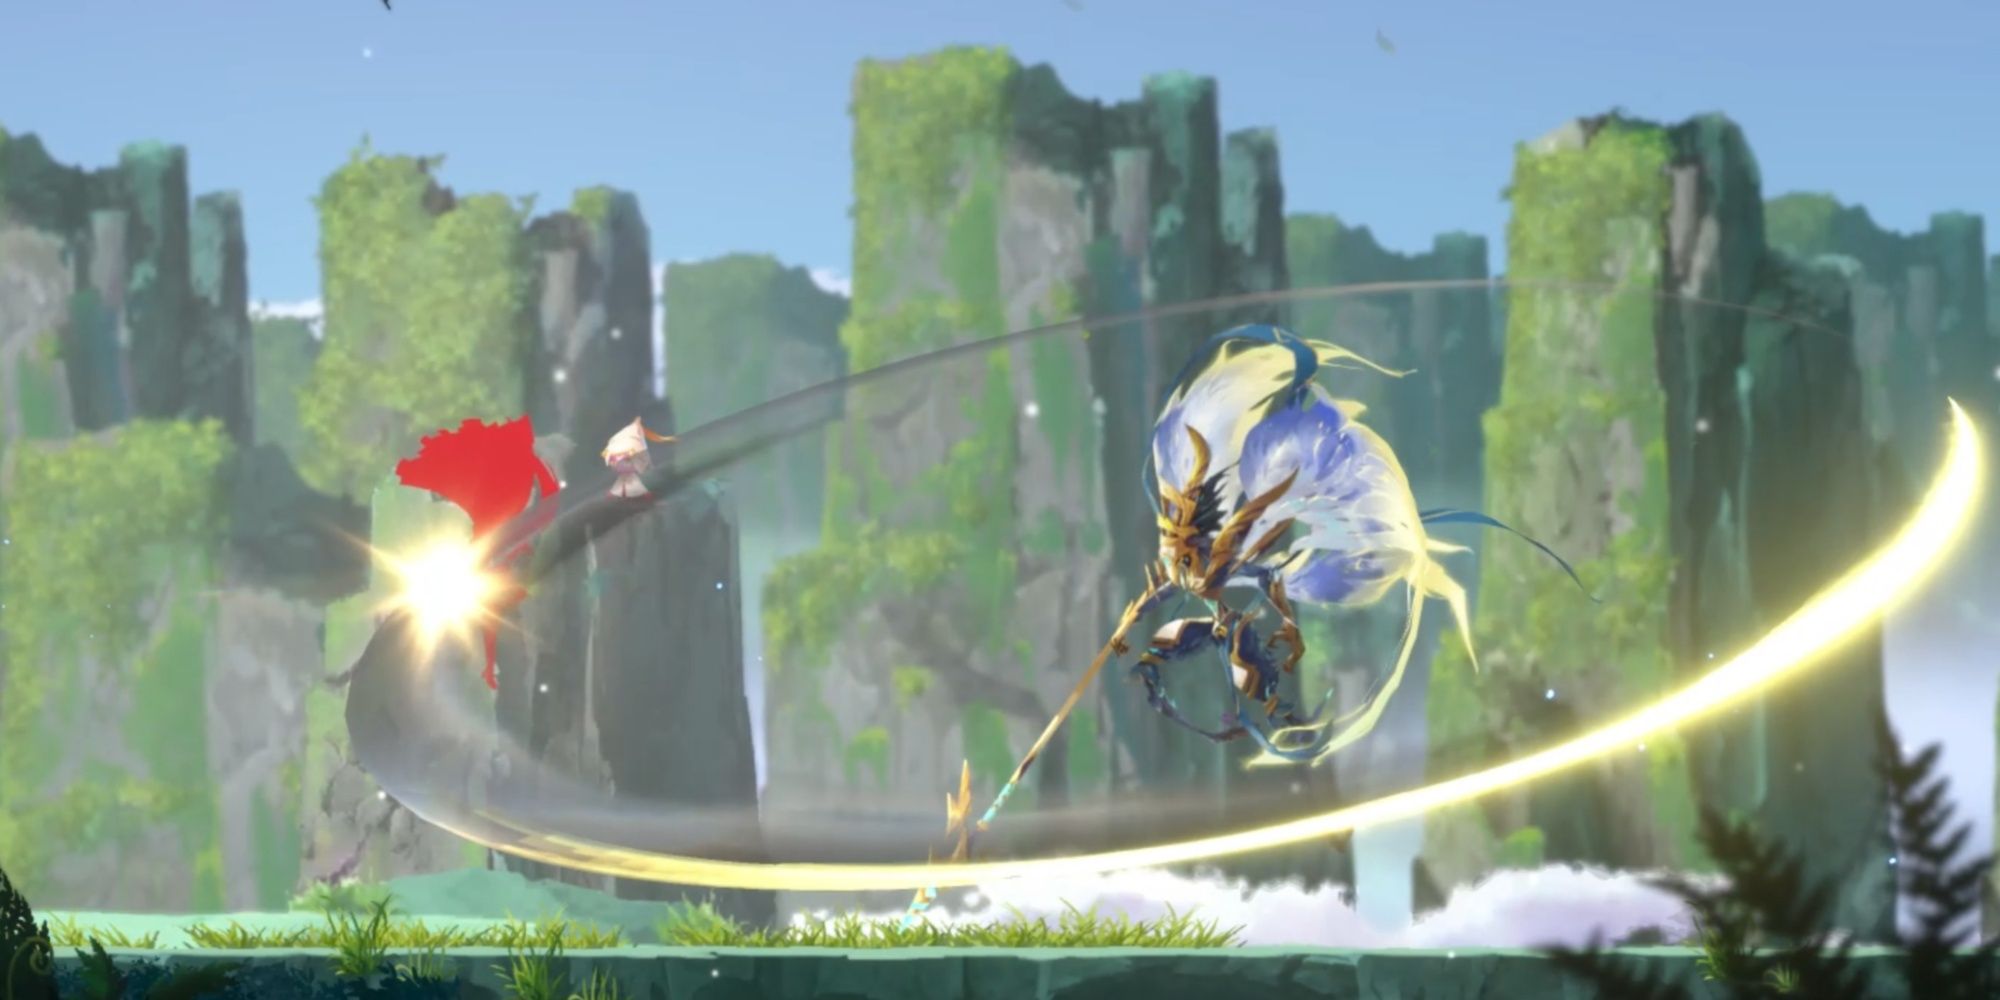 Loss, the Galefeather connecting a devastating Slash on Renee during their Triple Slash combo attack in Afterimage